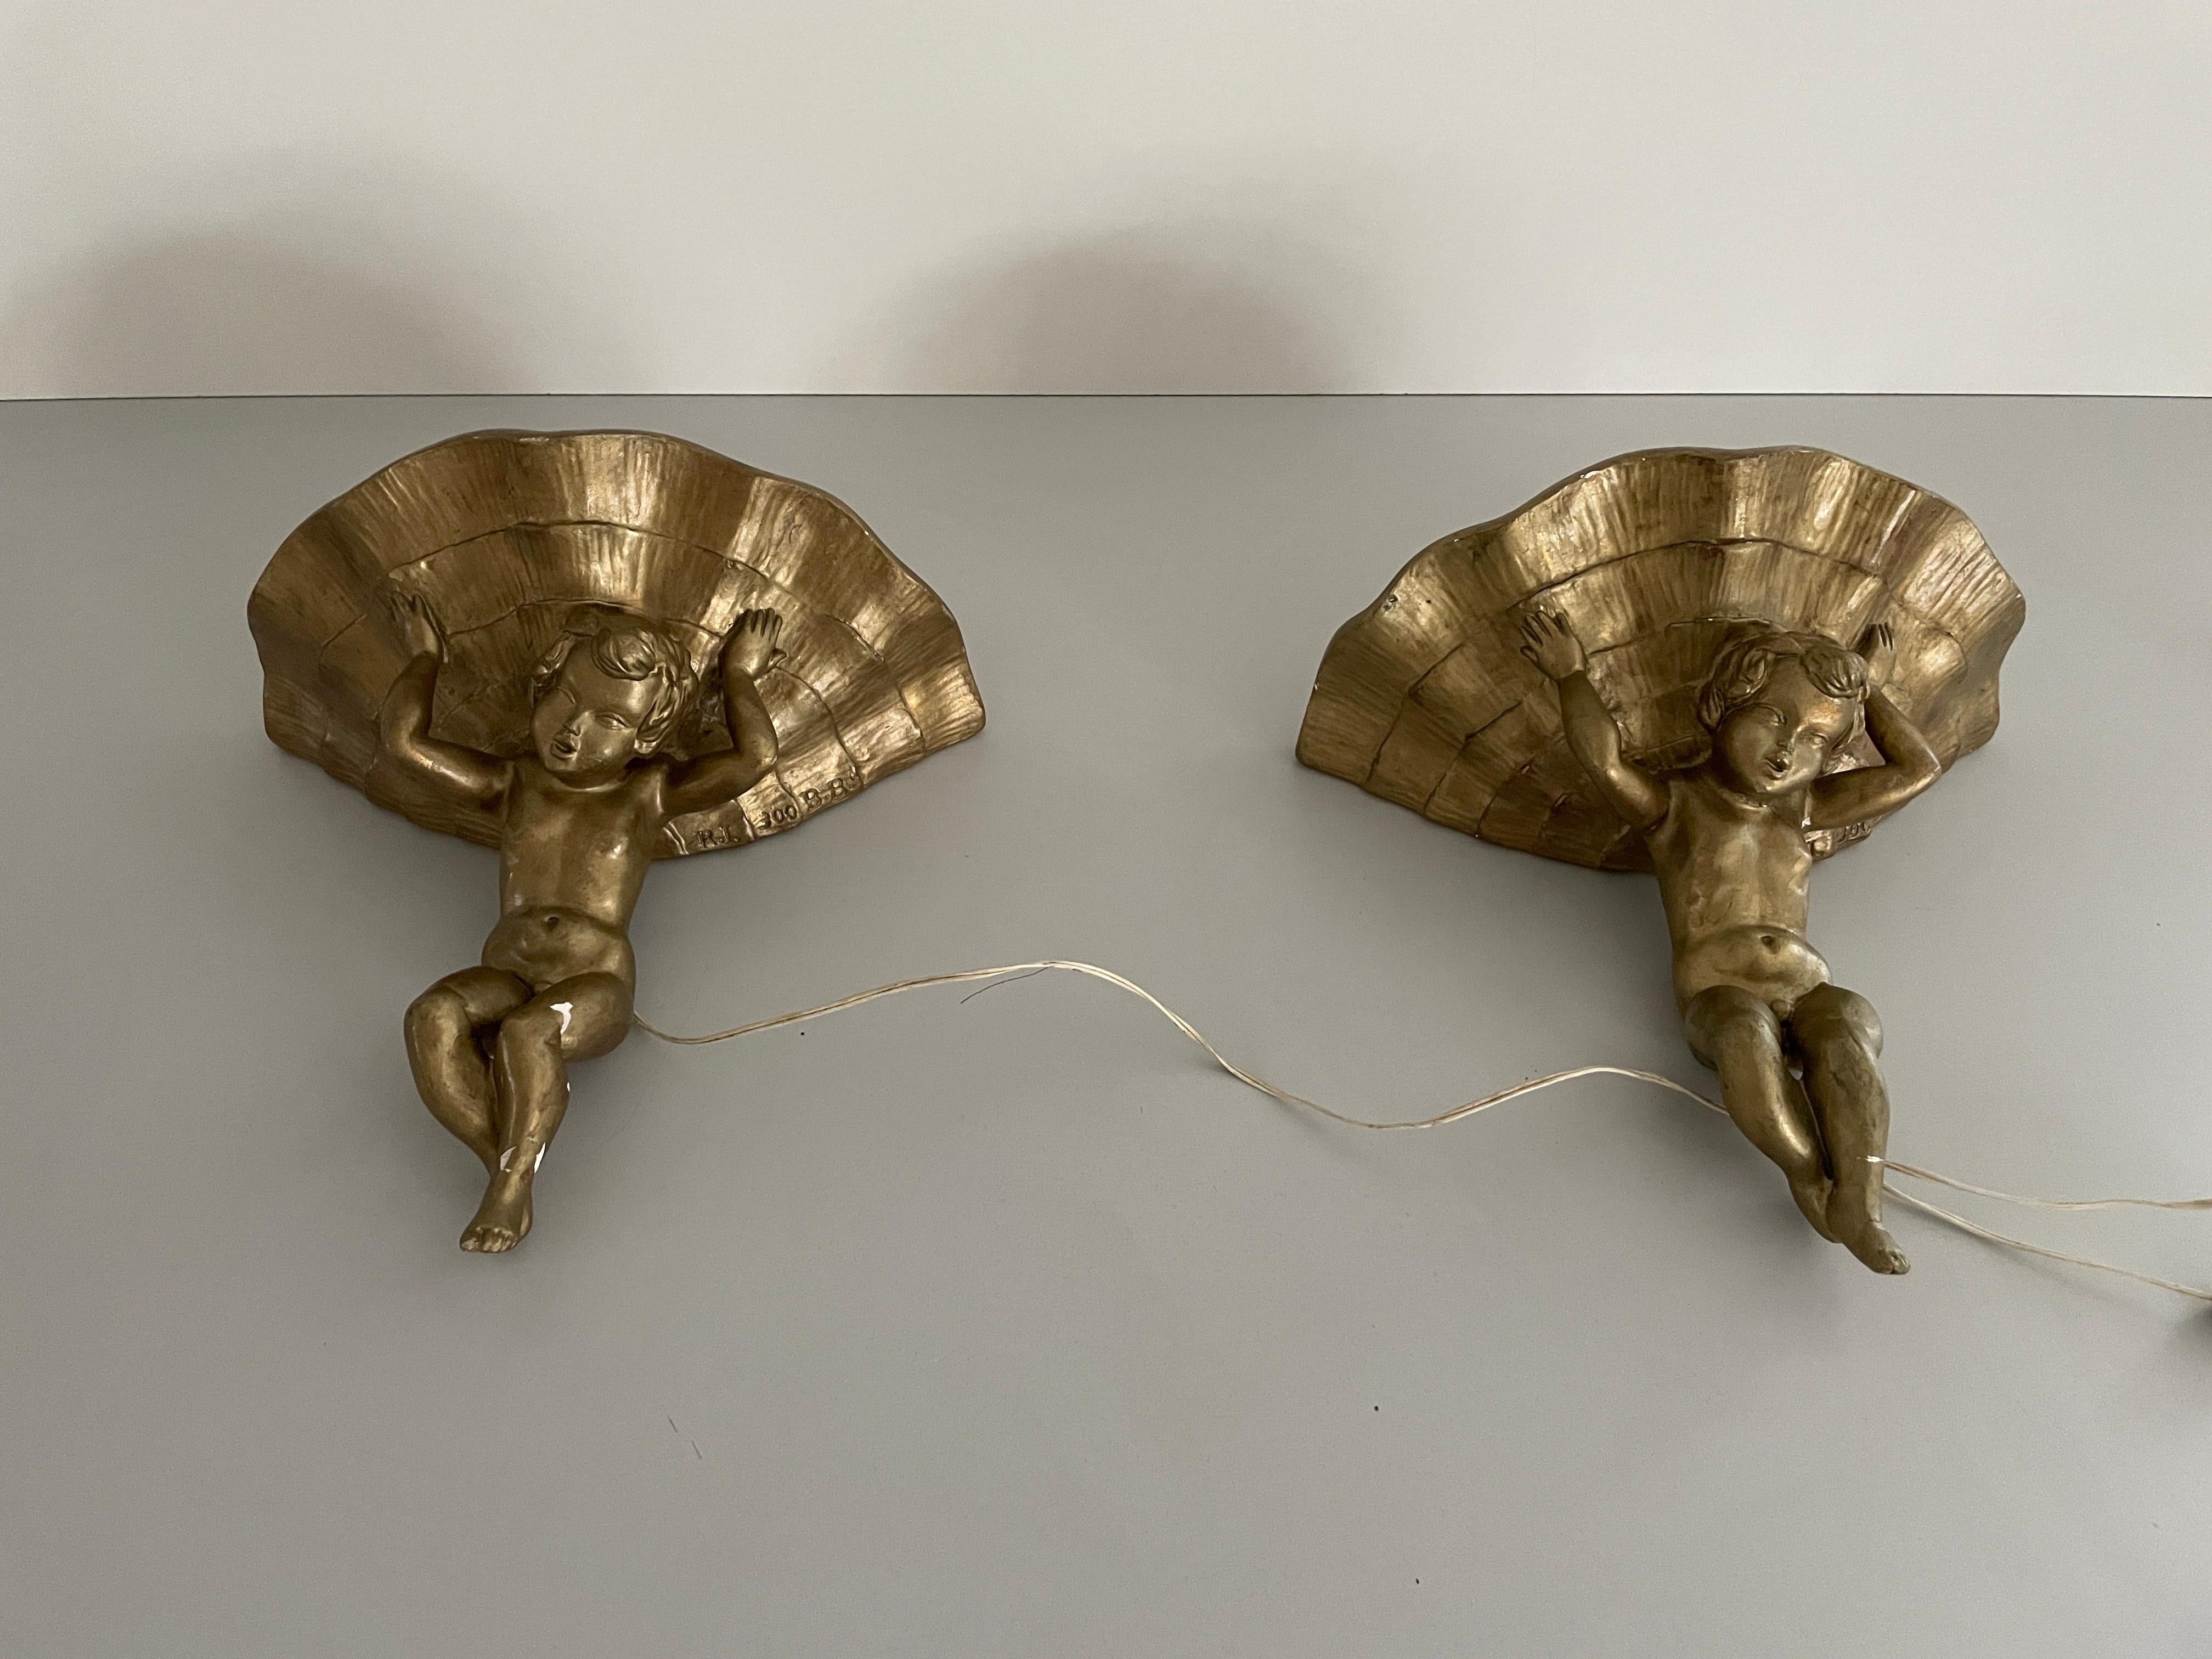 Made of Plaster Gold Coloured Pair of Sconces in Angel Sculpture, 1960s, Italy

Lampshade is in very good vintage condition.

Note: Some small parts on the lamp were damaged due to wear and were immediately glued on. some small pieces are still